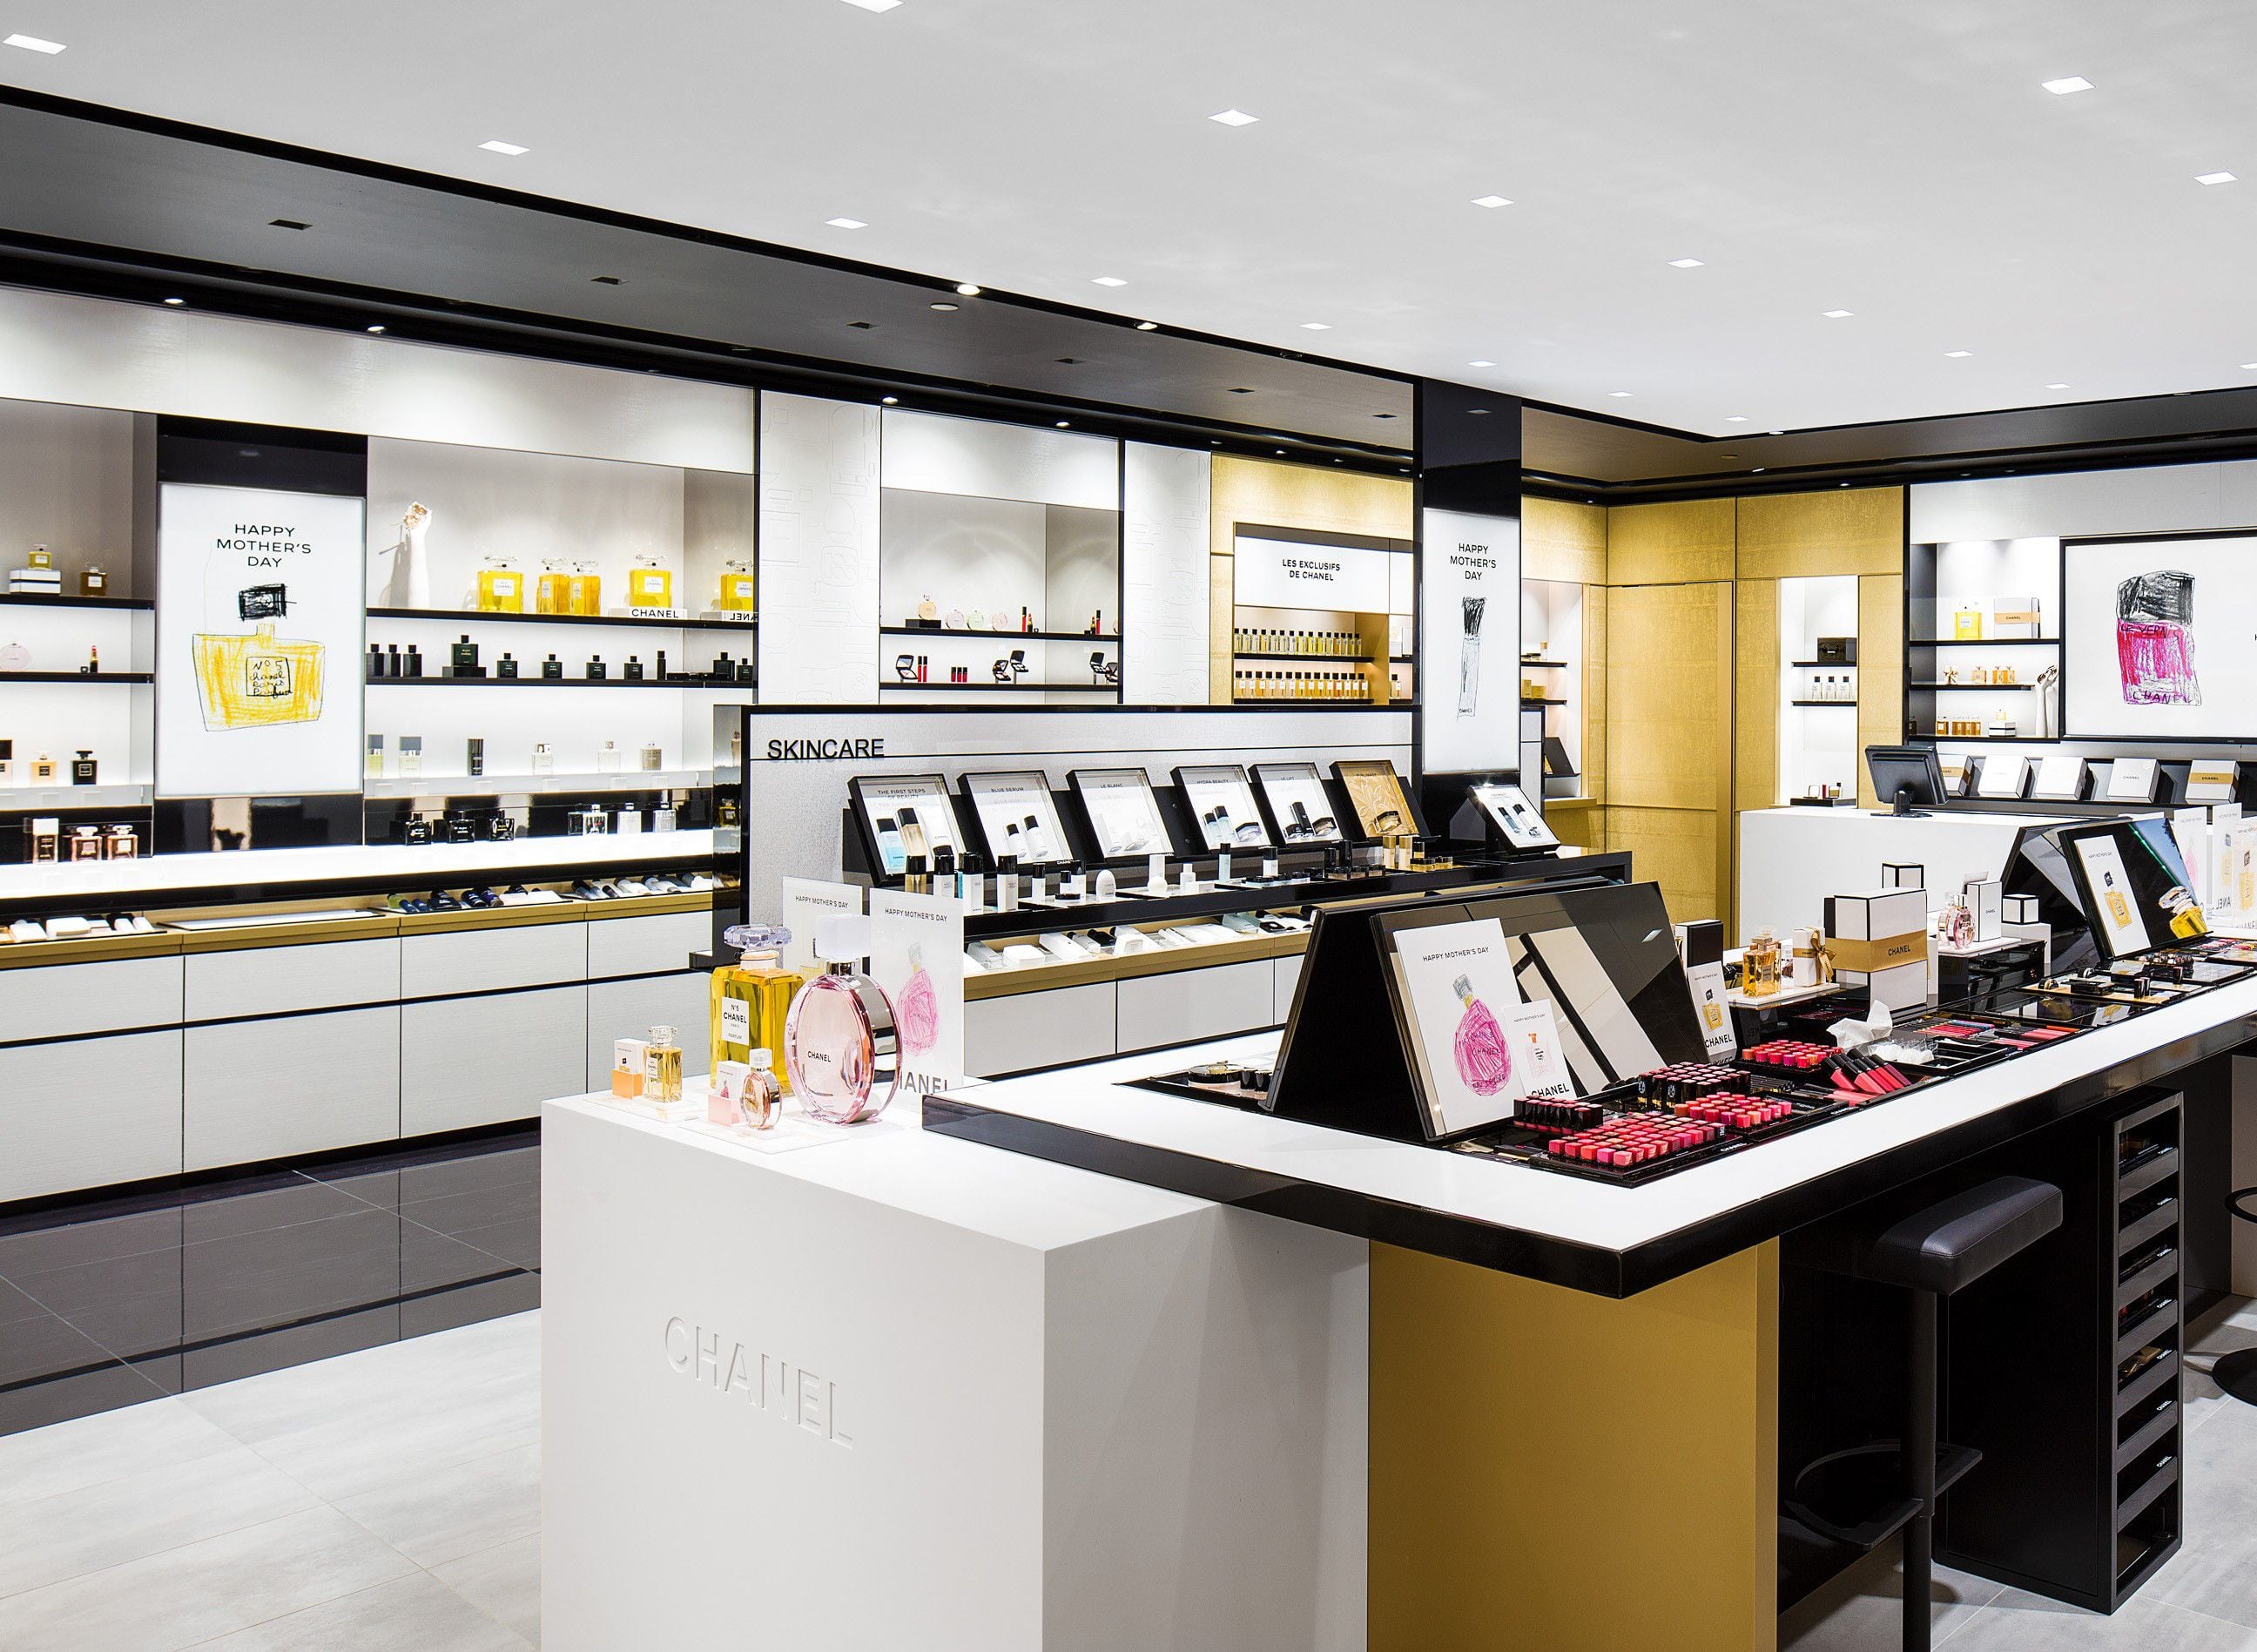 Chanel's new Beauty Boutique houses what might be the most